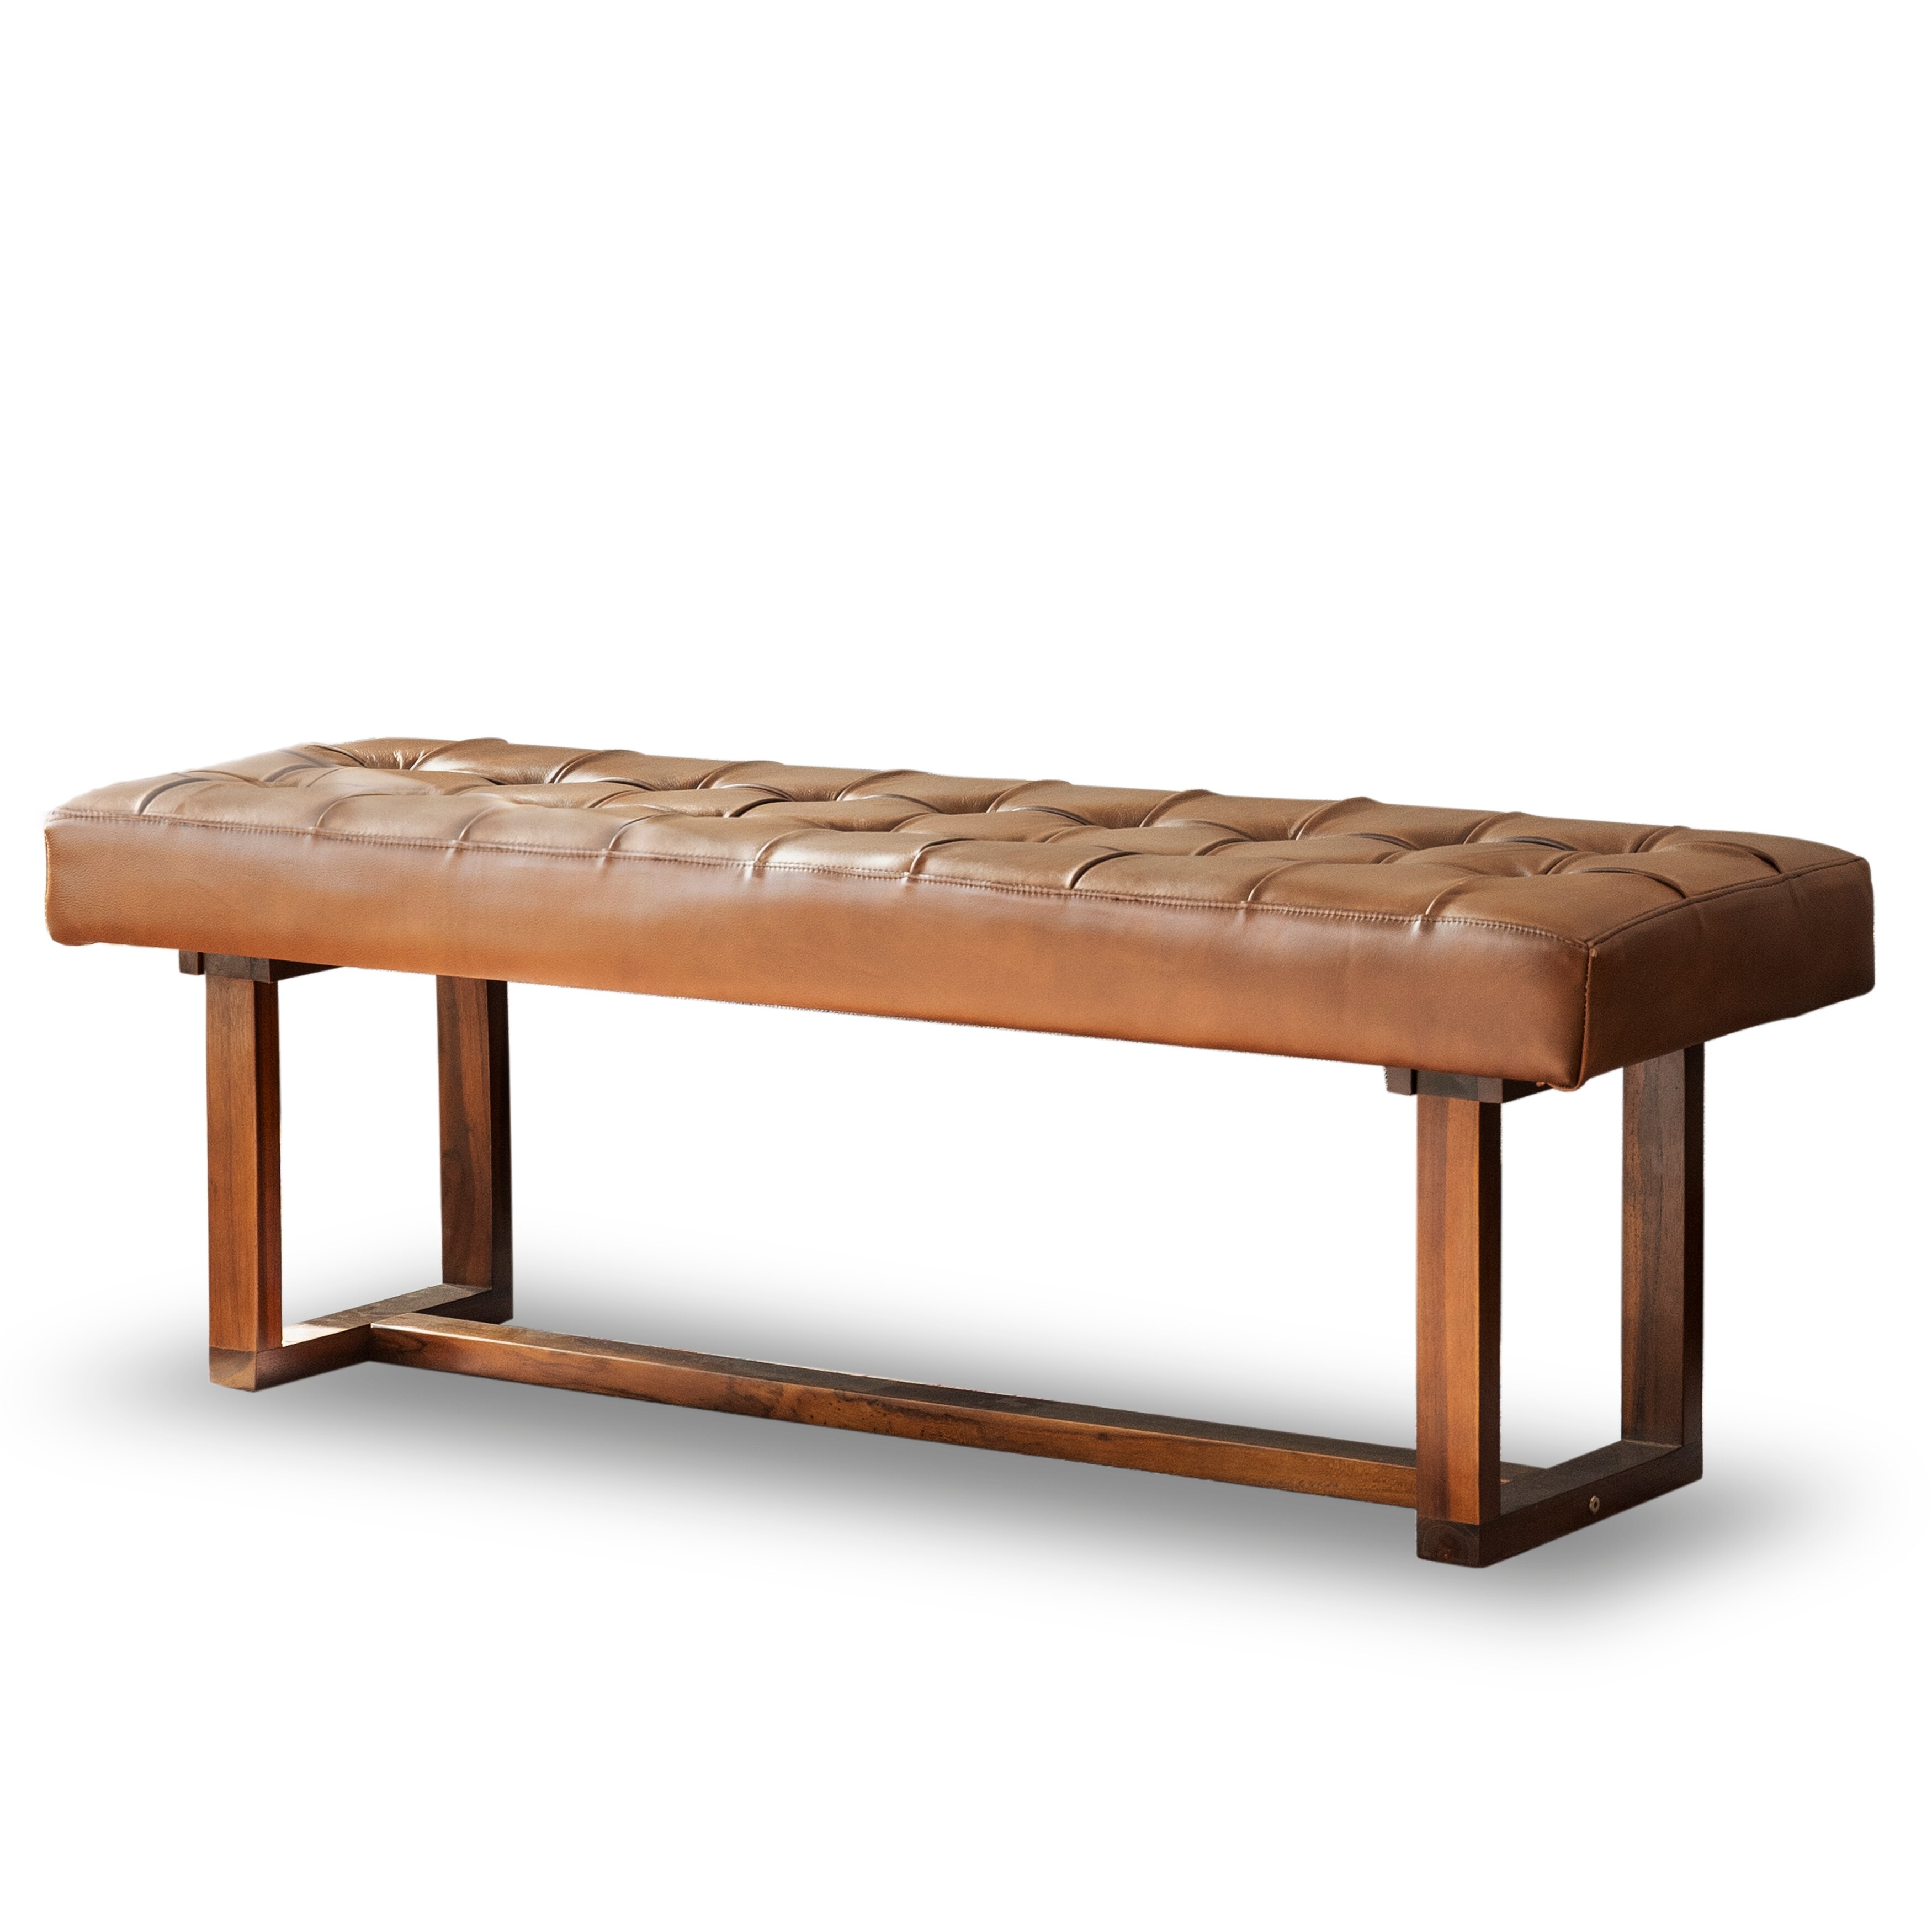 Sonia Mid-Century Tufted Rectangular Genuine Leather Bench in Tan